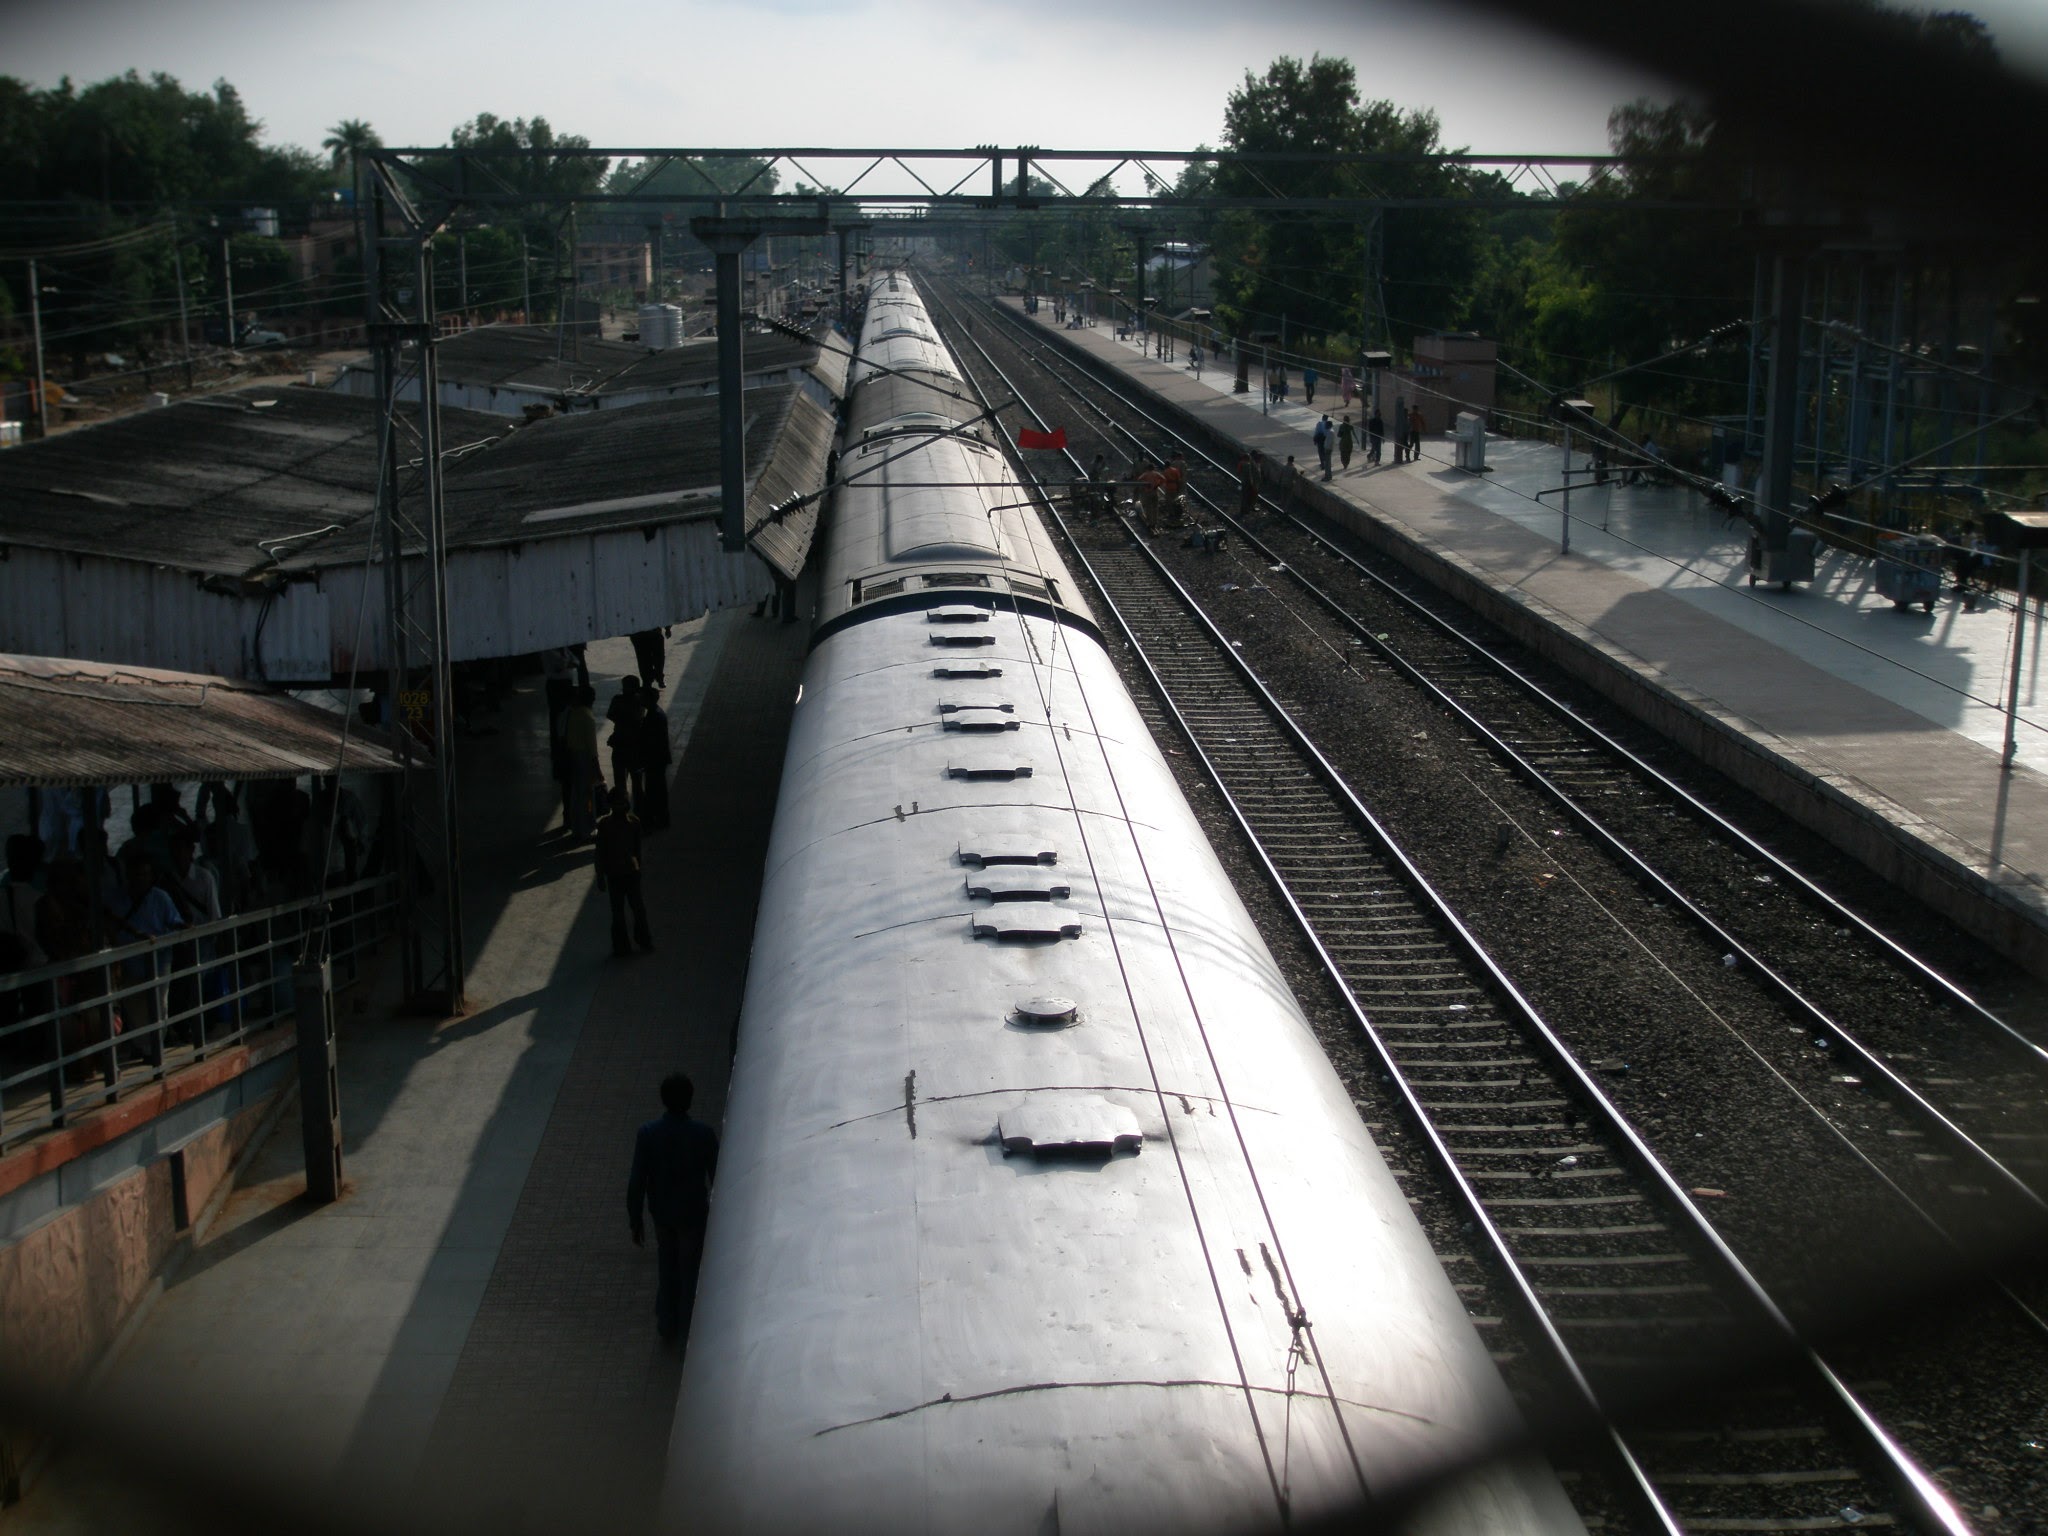 The top of train carriages sitting on a station platform in India